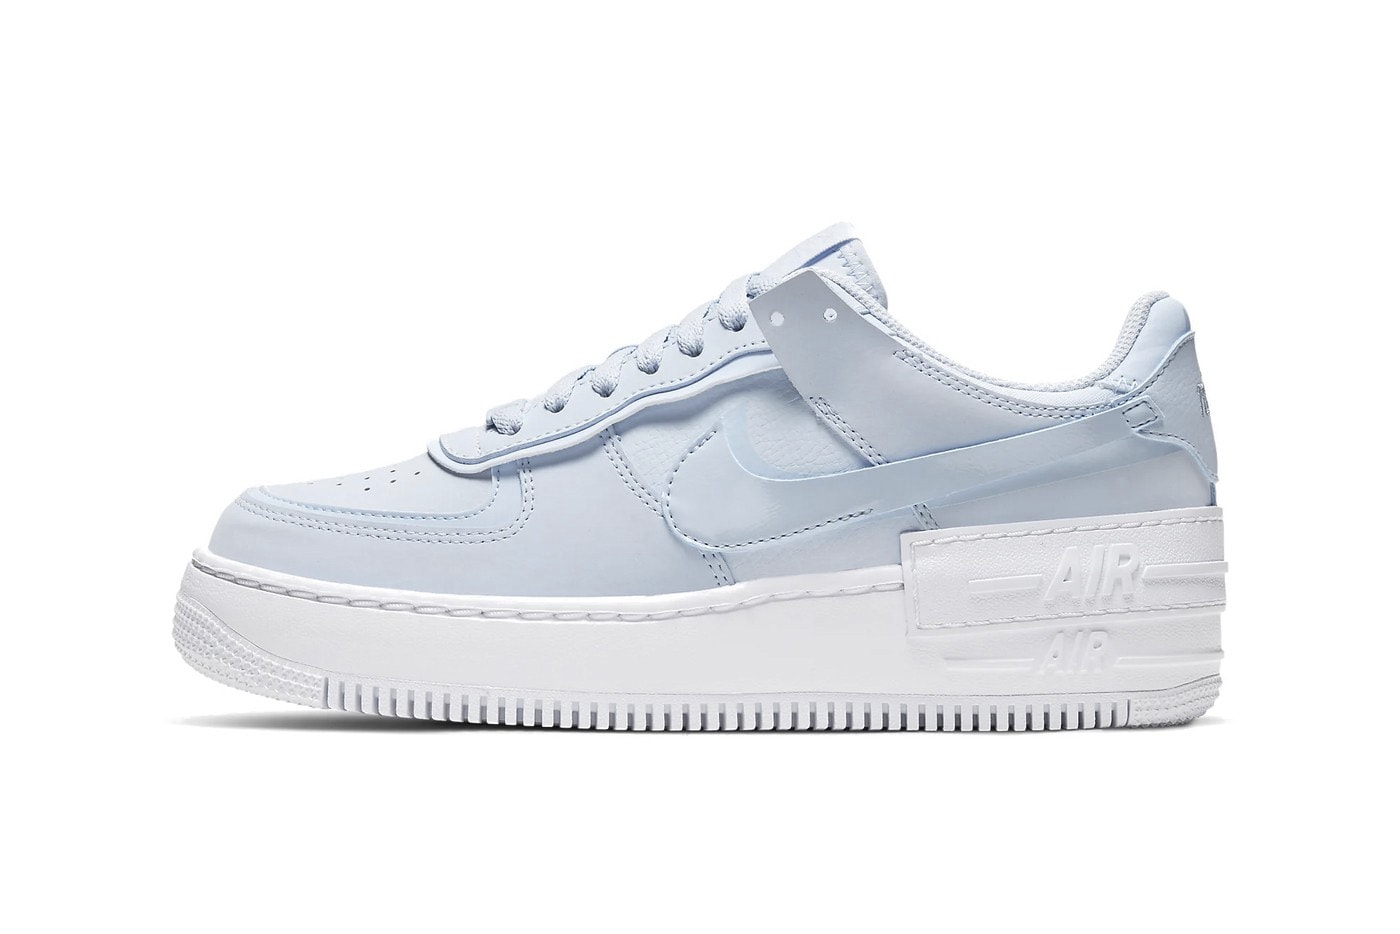 Nike Air Force 1 Best Fall Releases Sneaker Shoe Where To Buy Pink White Yellow Green 